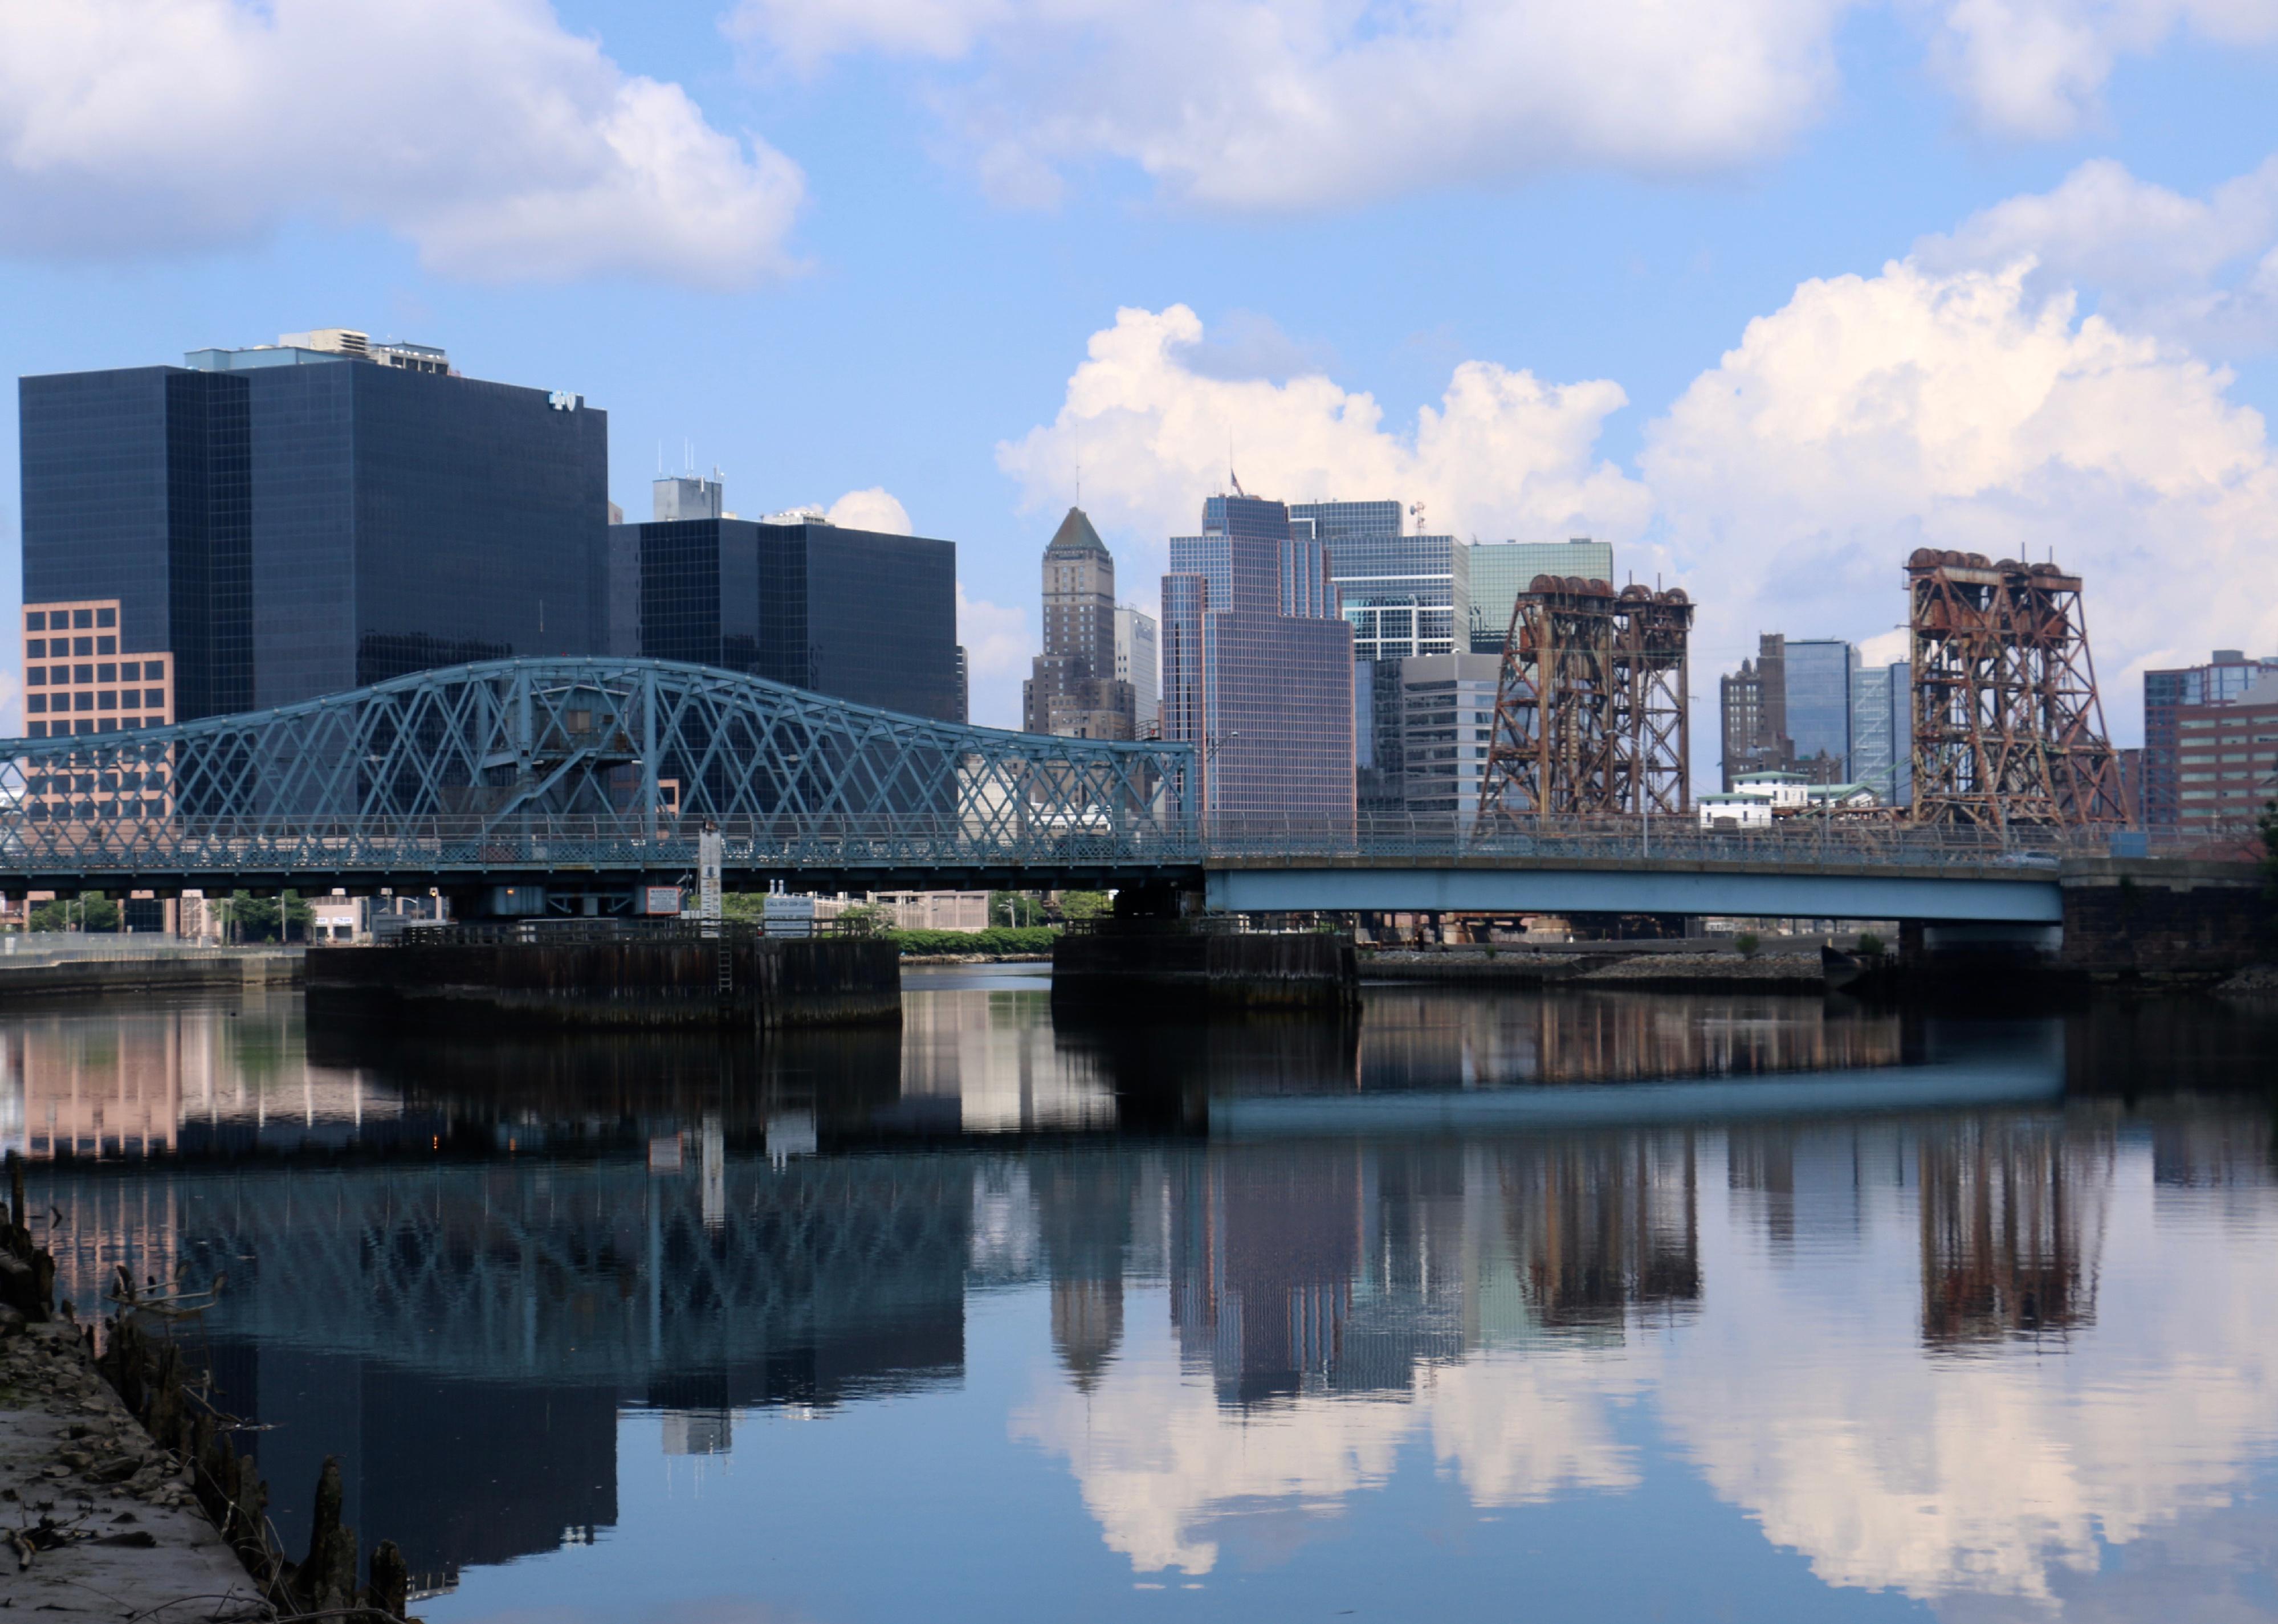 View of bridges on the Passaic River and the skyline of downtown Newark